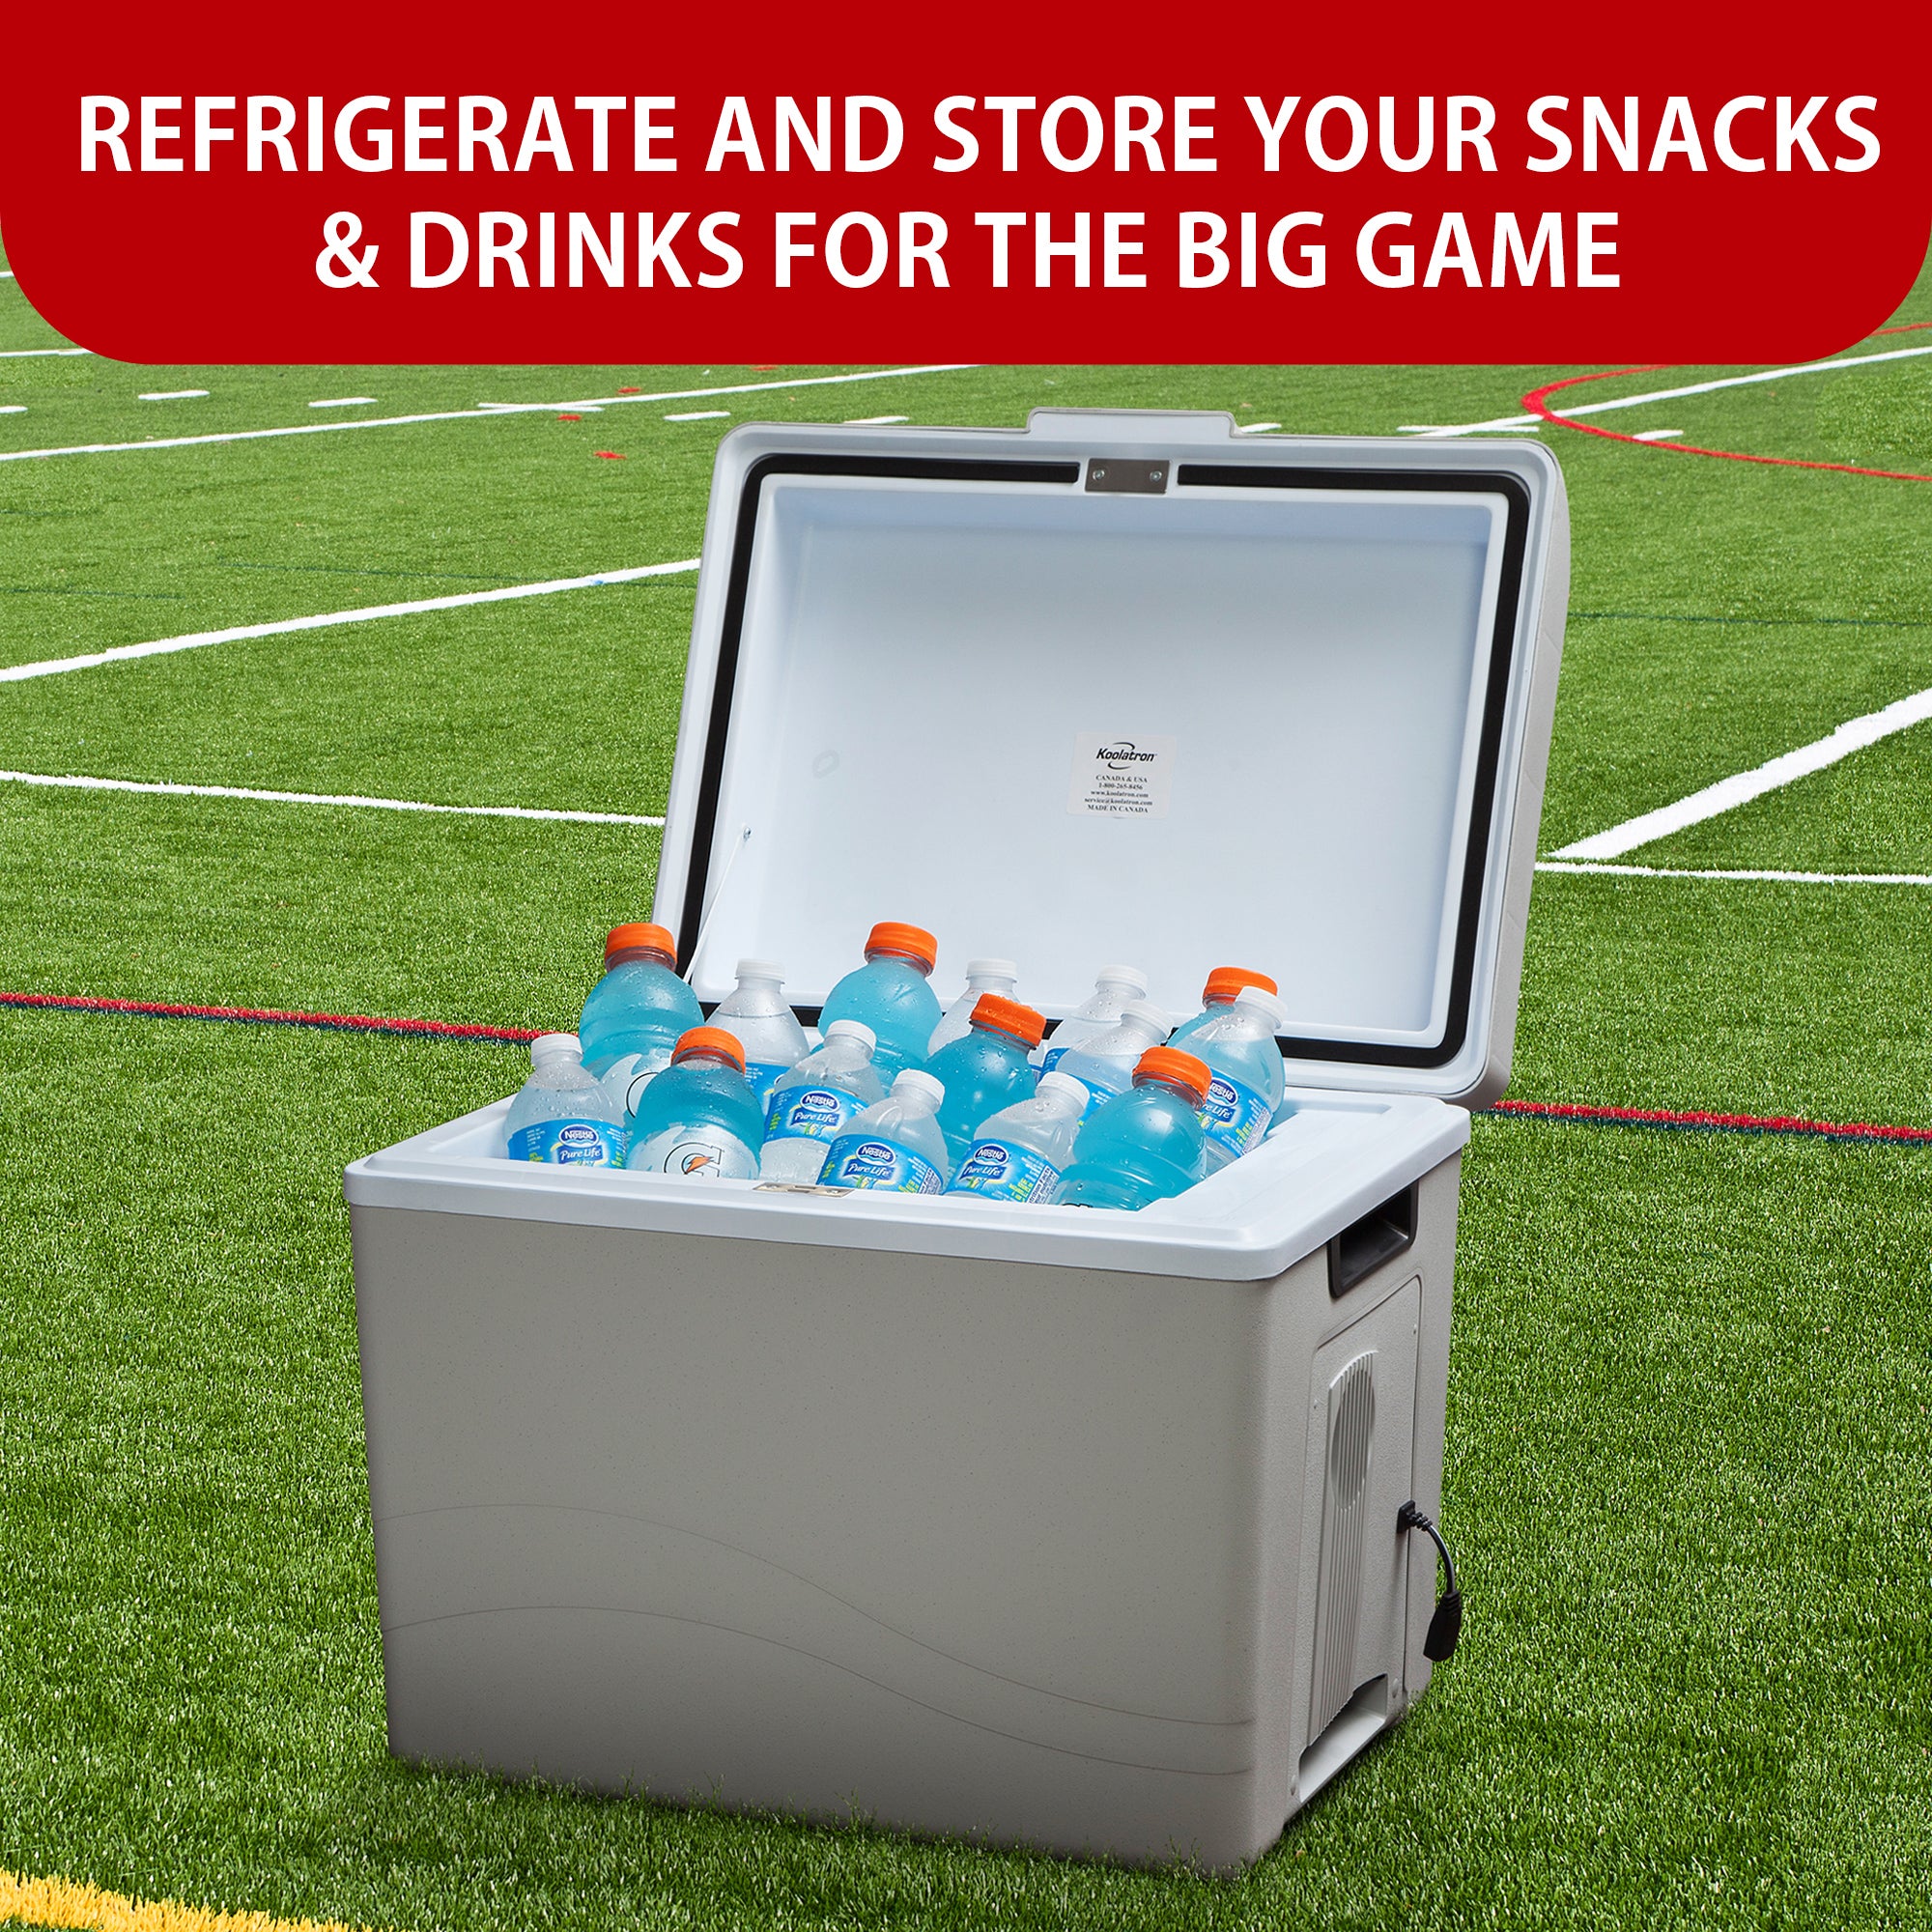 Koolatron portable 12V cooler/warmer open and filled with water bottles and sports drinks on a grass sports field. Text above reads, "REFRIGERATE AND STORE YOUR SNACKS AND DRINKS FOR THE BIG GAME"